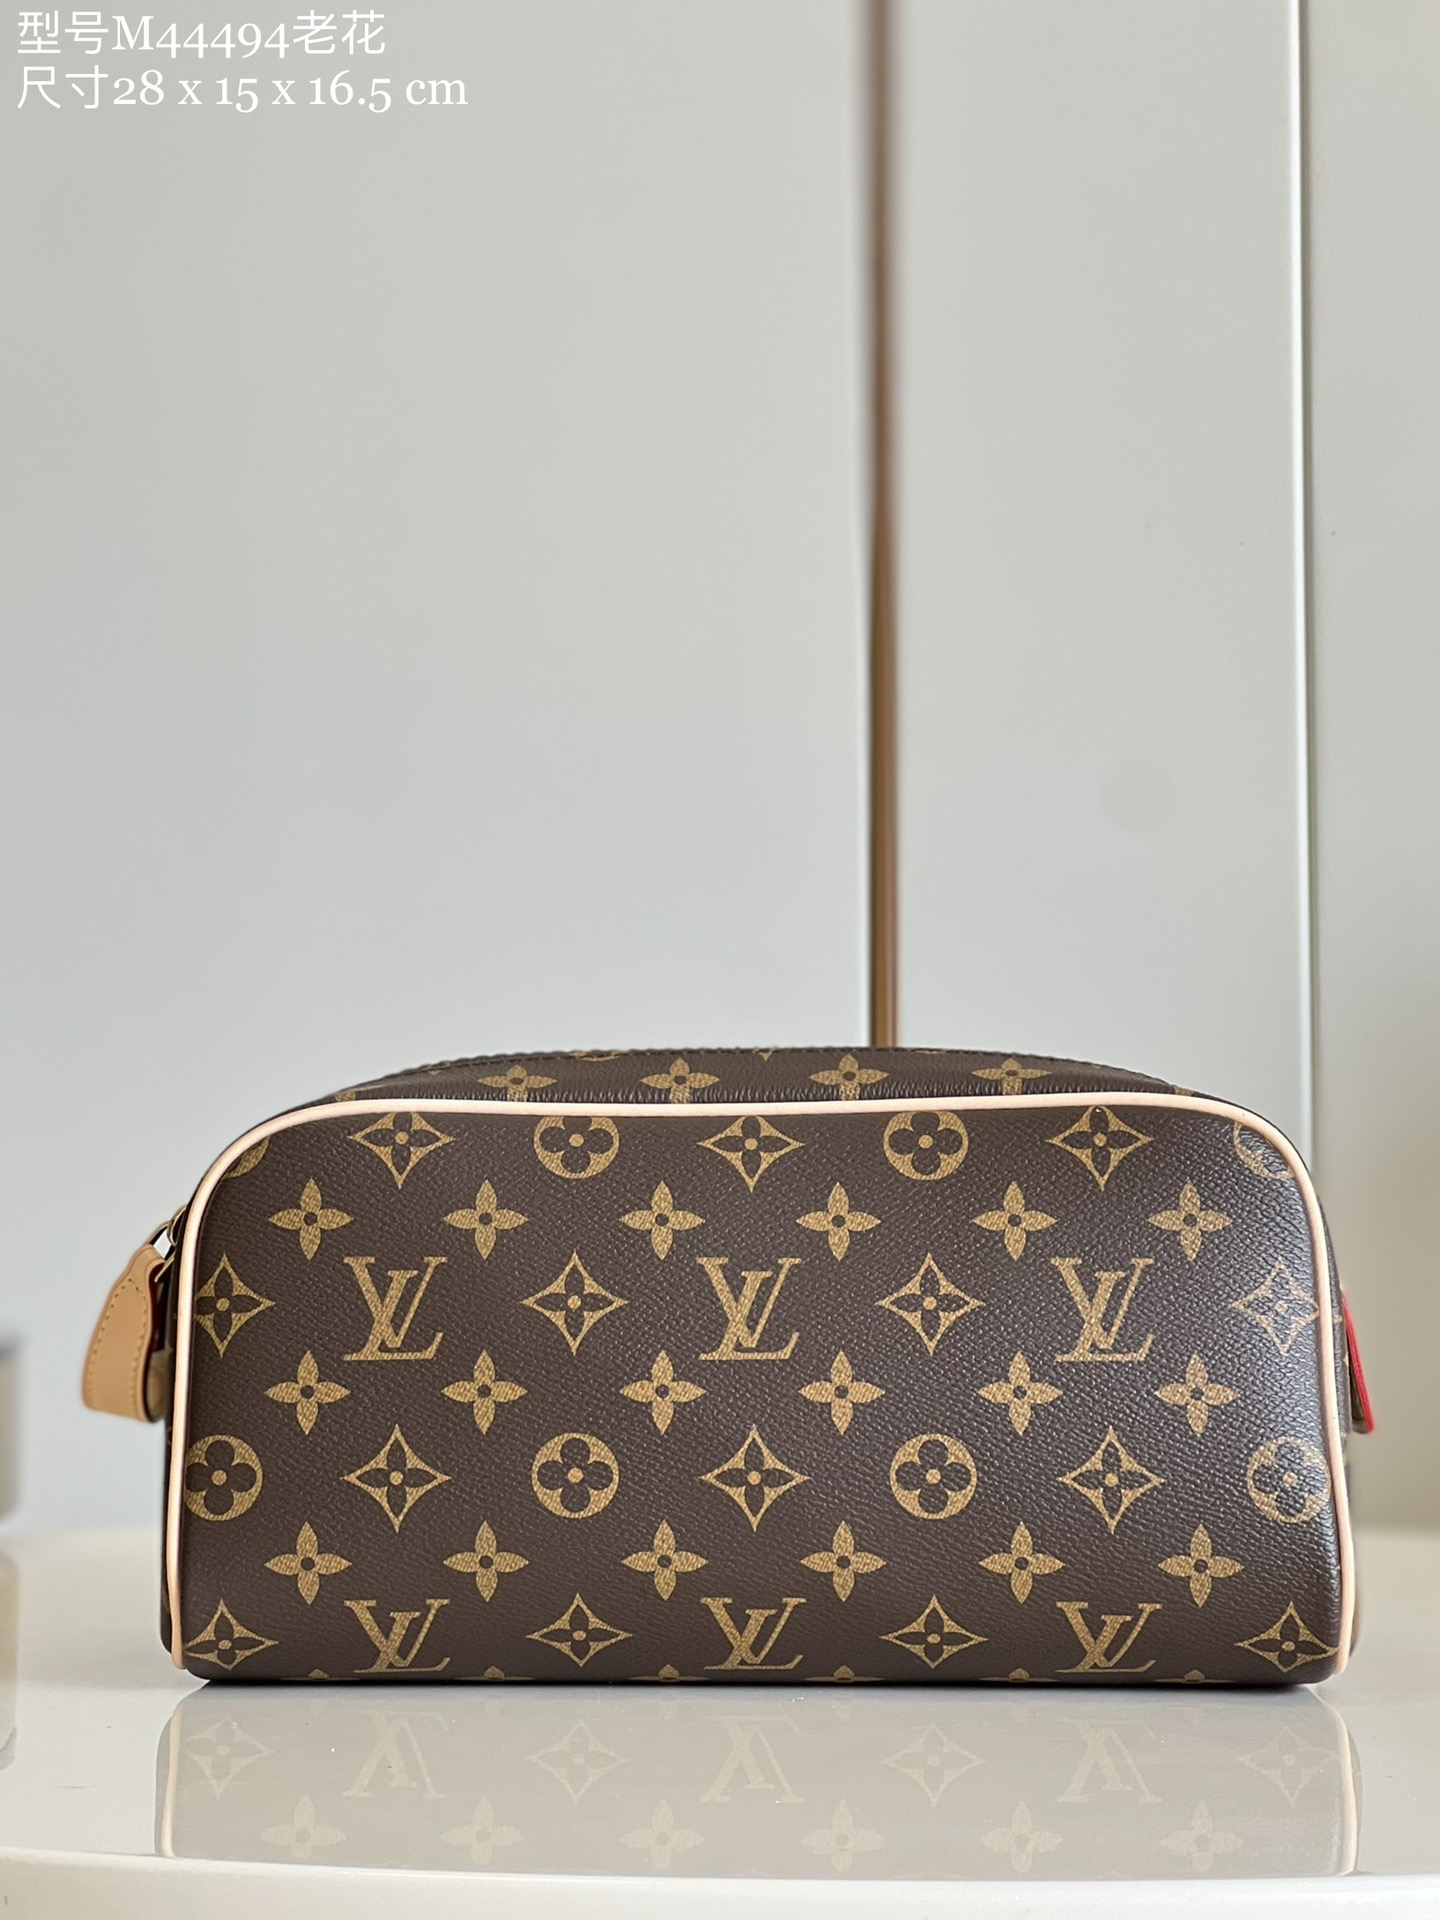 Where Can You Buy replica
 Louis Vuitton Clutches & Pouch Bags Cosmetic Bags Monogram Canvas Cowhide M44494